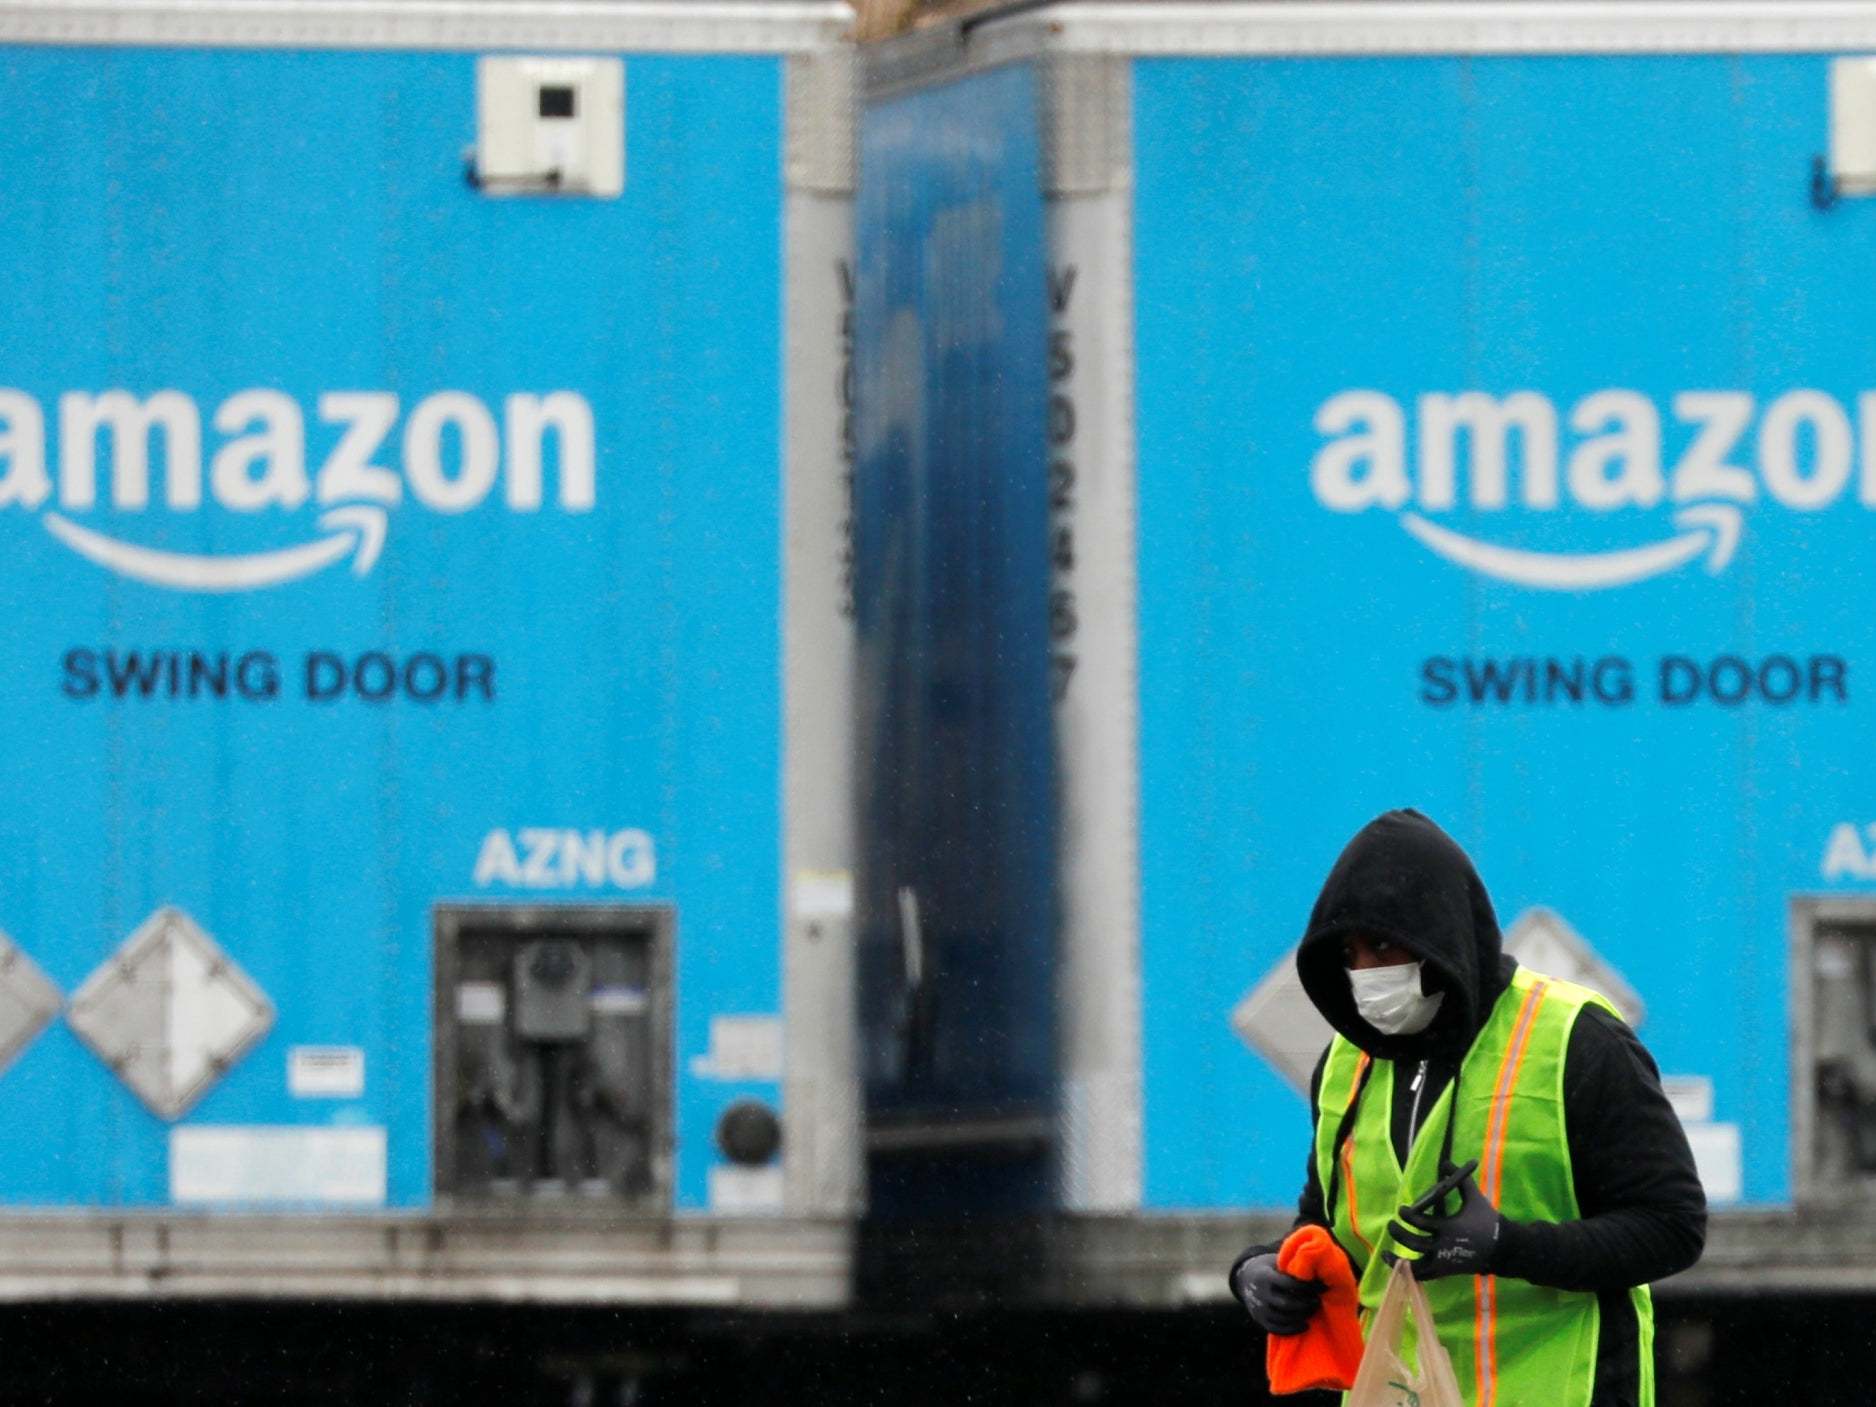 Amazon workers at a warehouse in New York were recently sent home after one employee tested positive for the virus (Reuters)